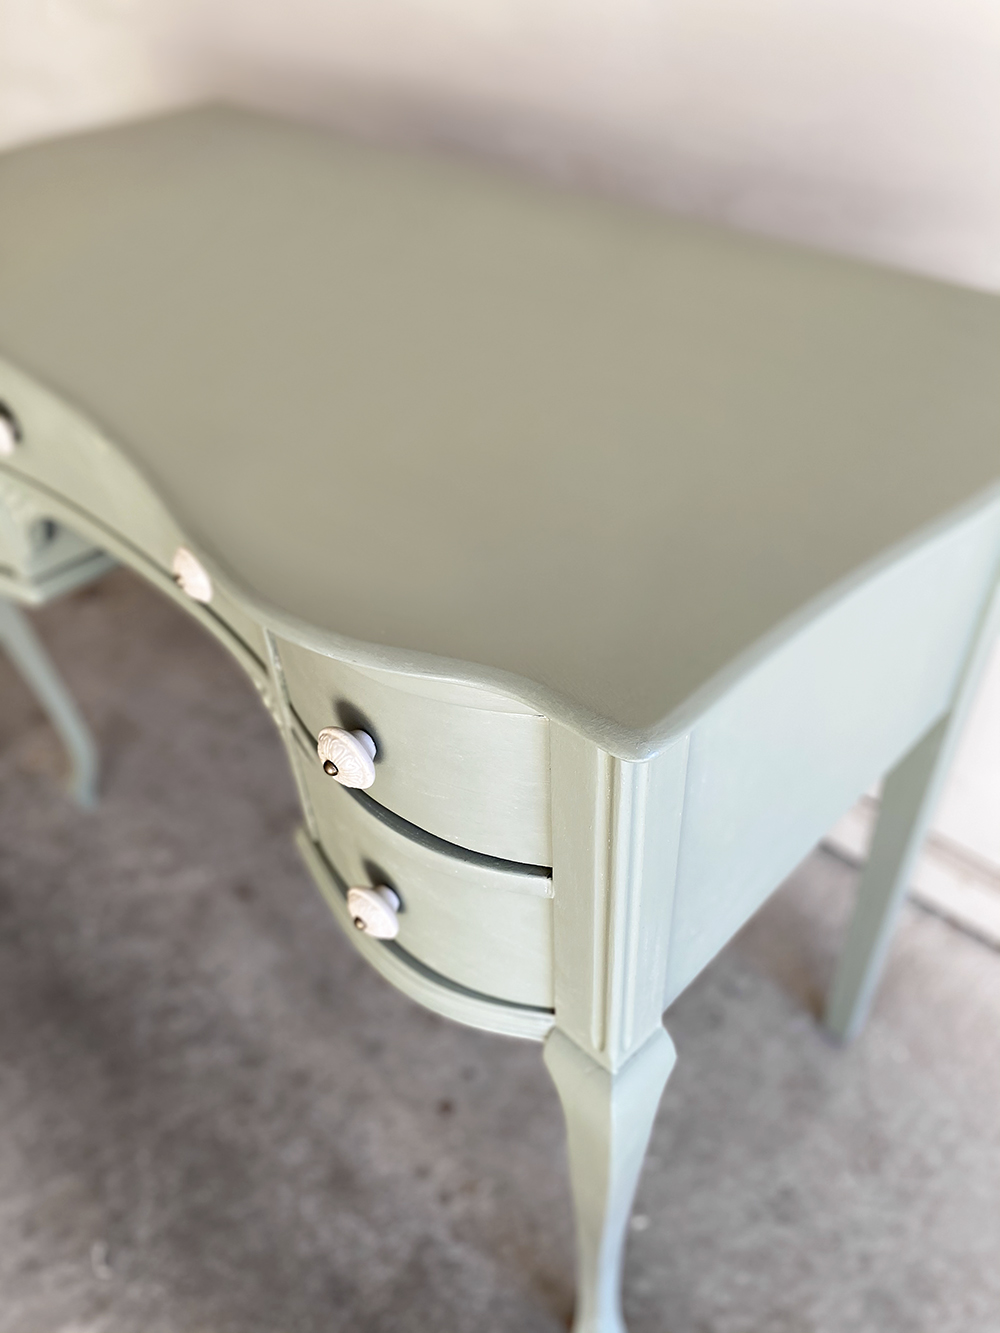 Sharing a peek into an upcycled antique DIY desk using milk paint that will be going in the girls' bedroom. Get a look at this ongoing project over at KaraLayne.com!